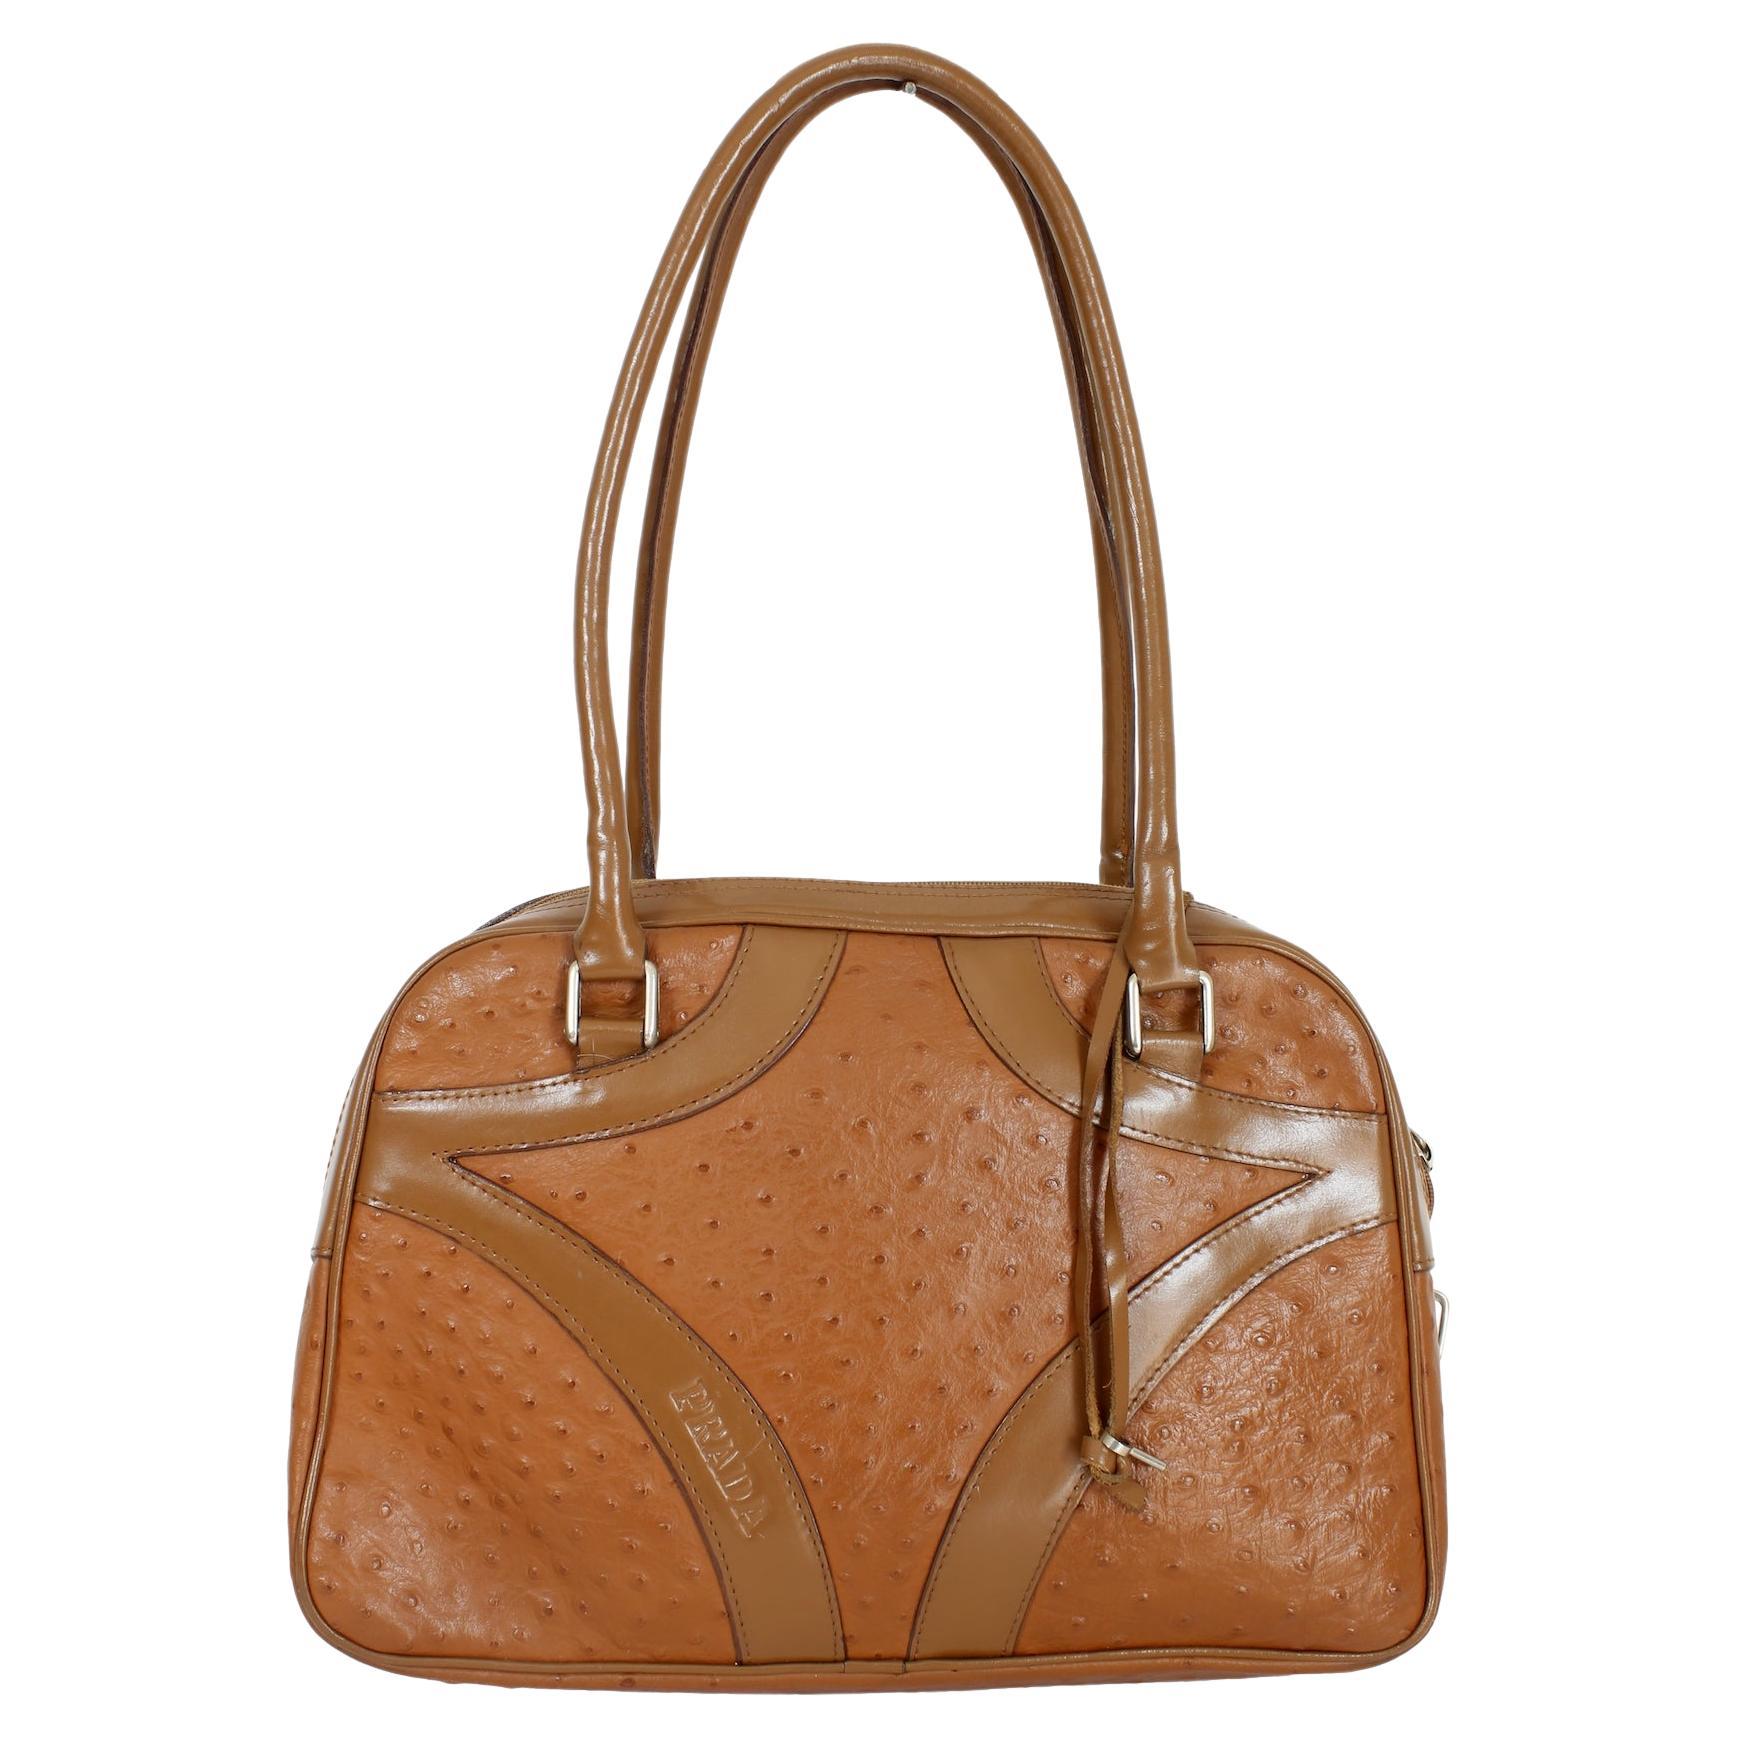 Are ostrich leather bags expensive?